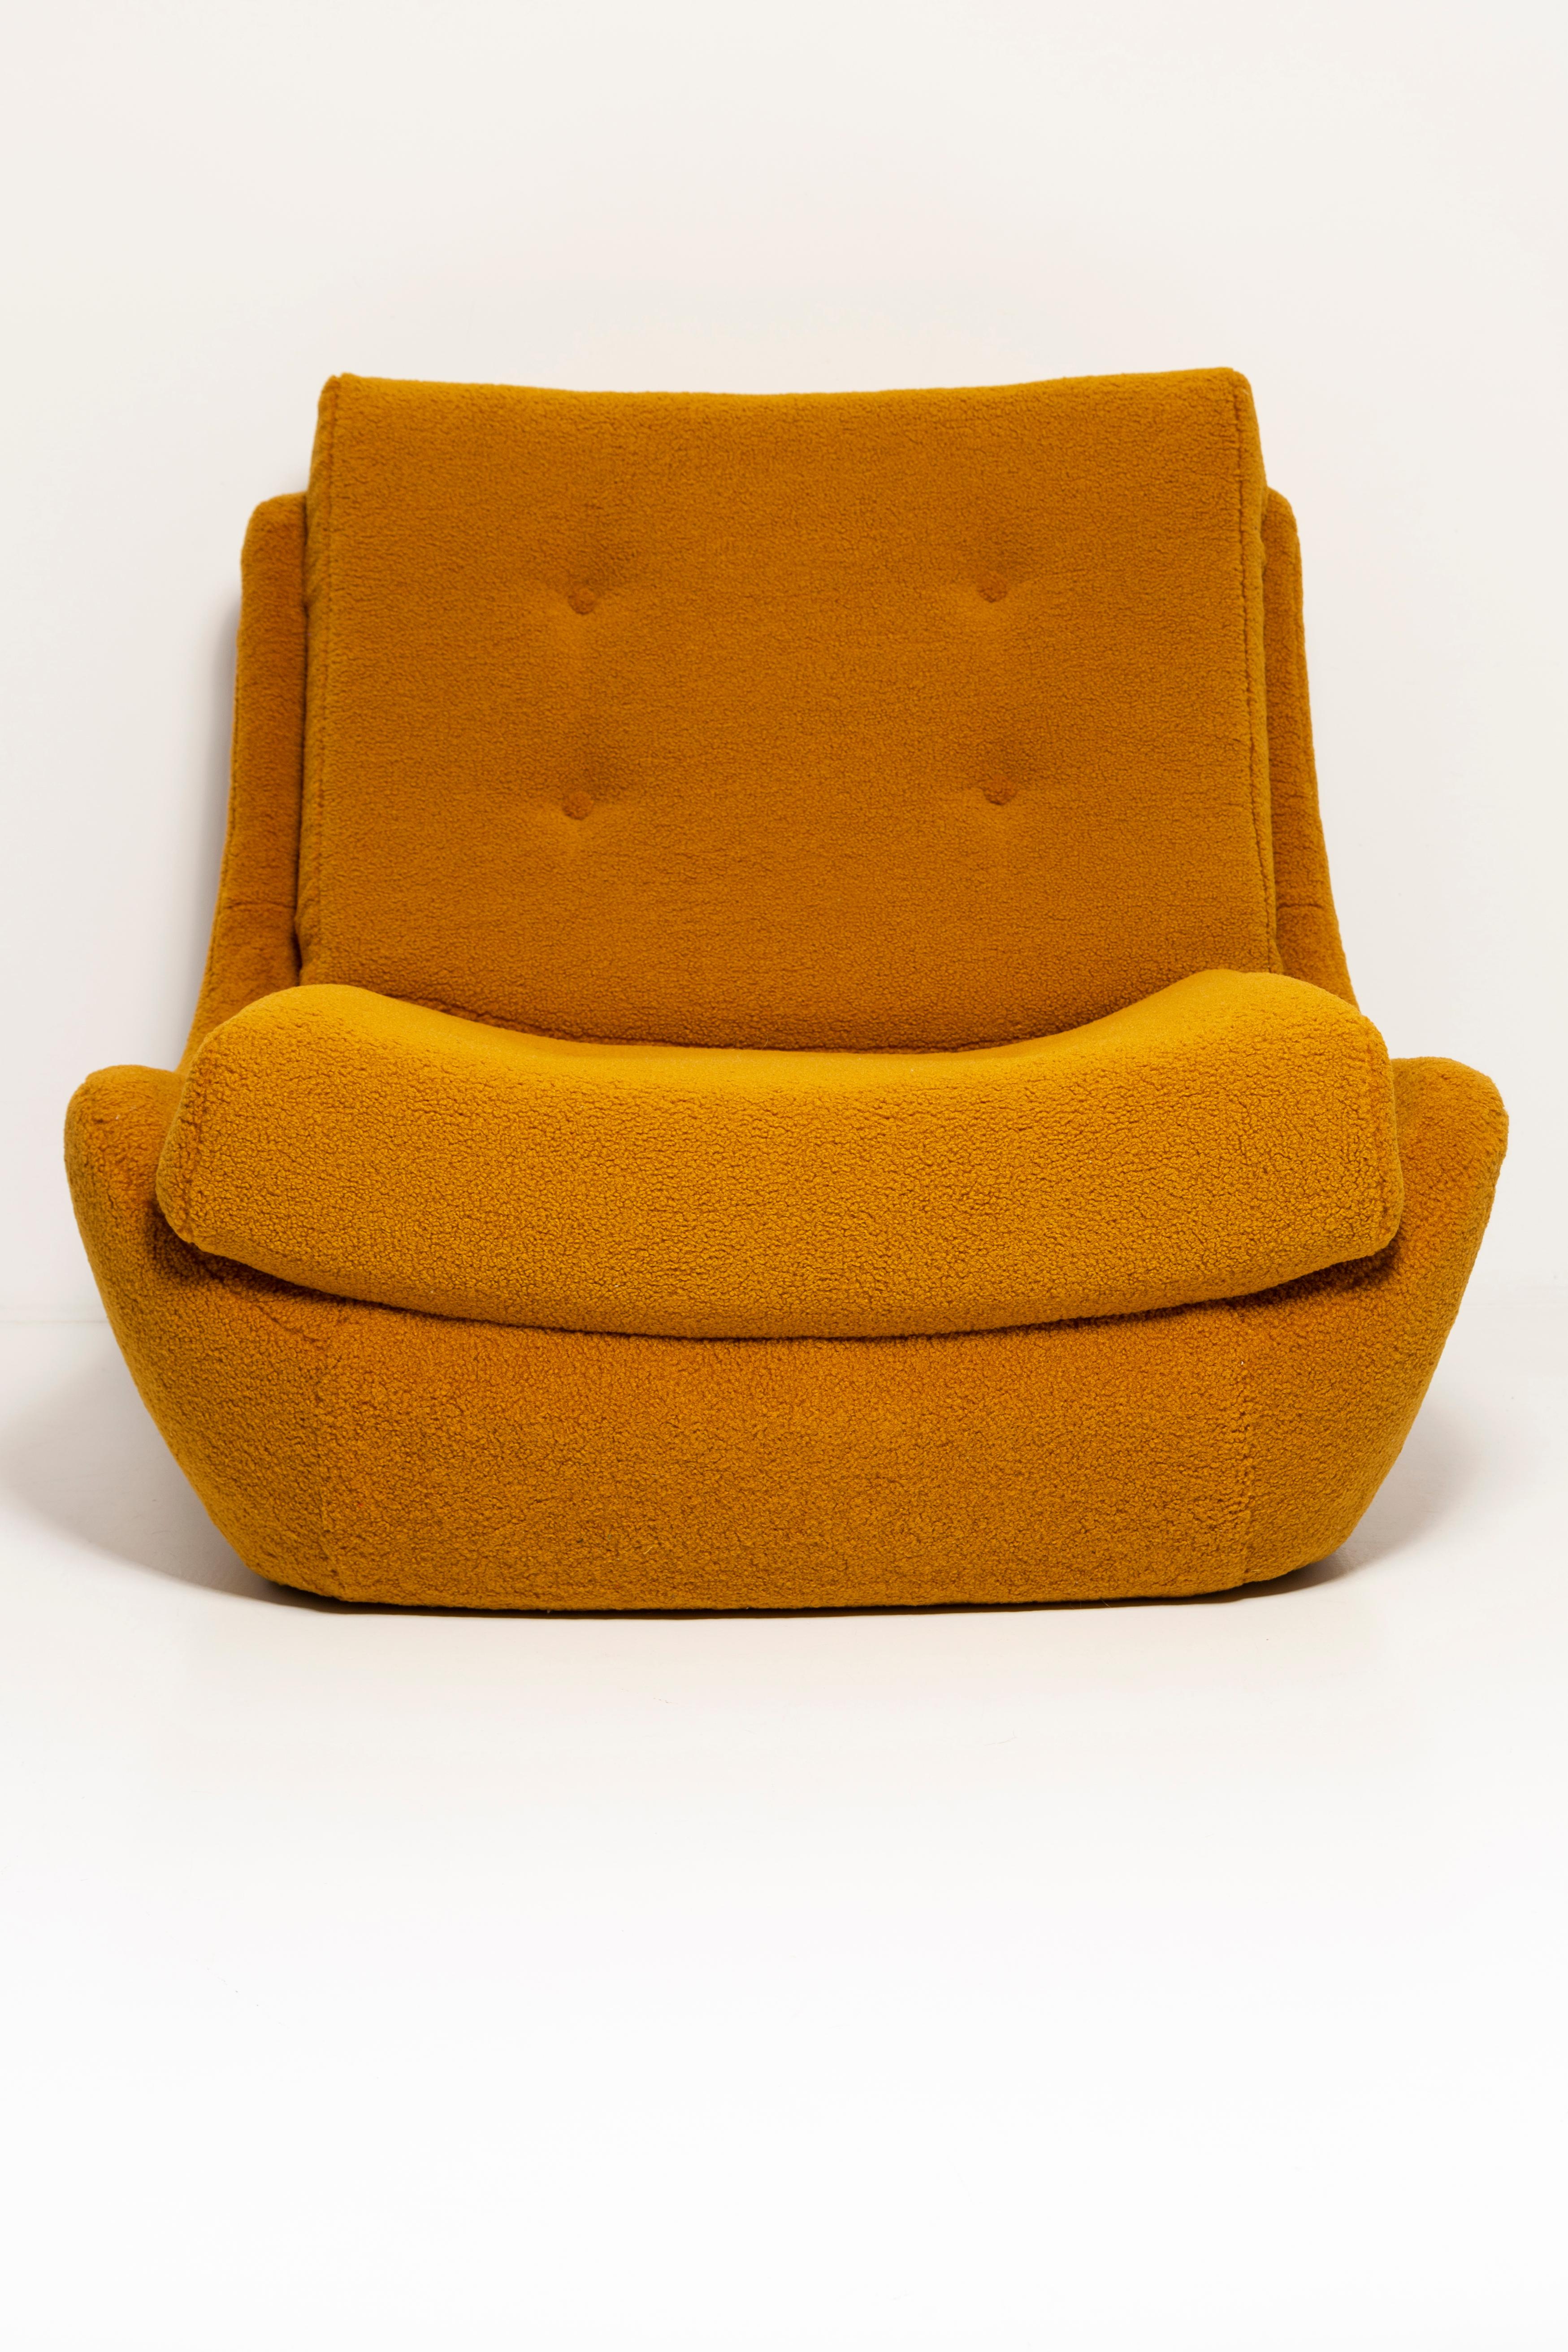 Pair of Mid Century Vintage Ochre Yellow Boucle Atlantis Big Armchairs, 1960s For Sale 1